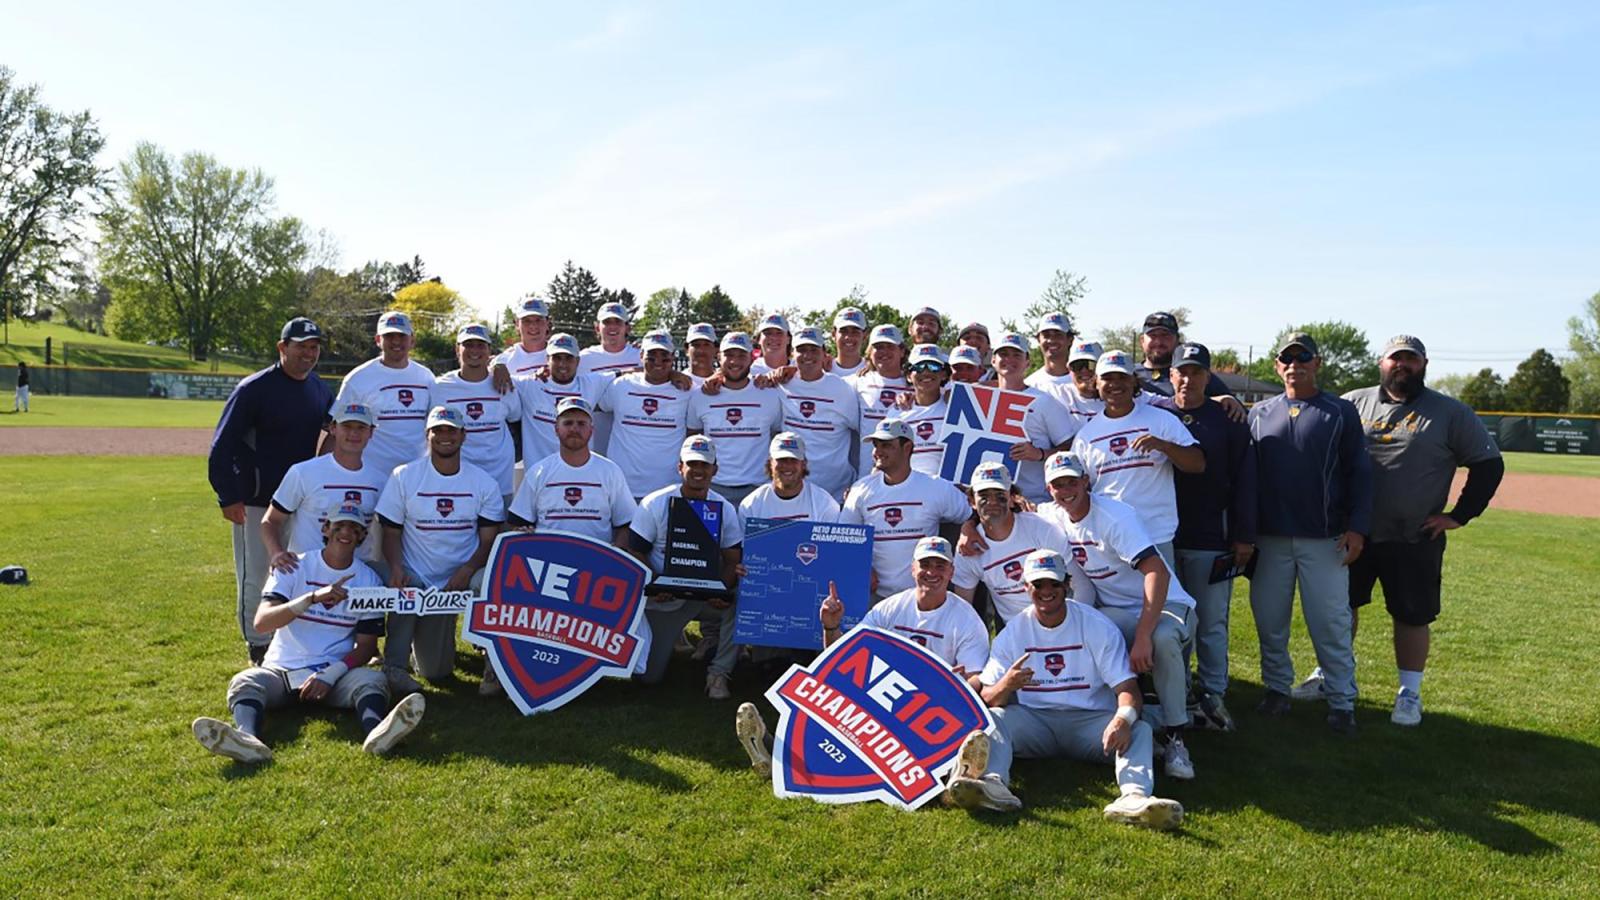 Pace baseball clinches first-ever title